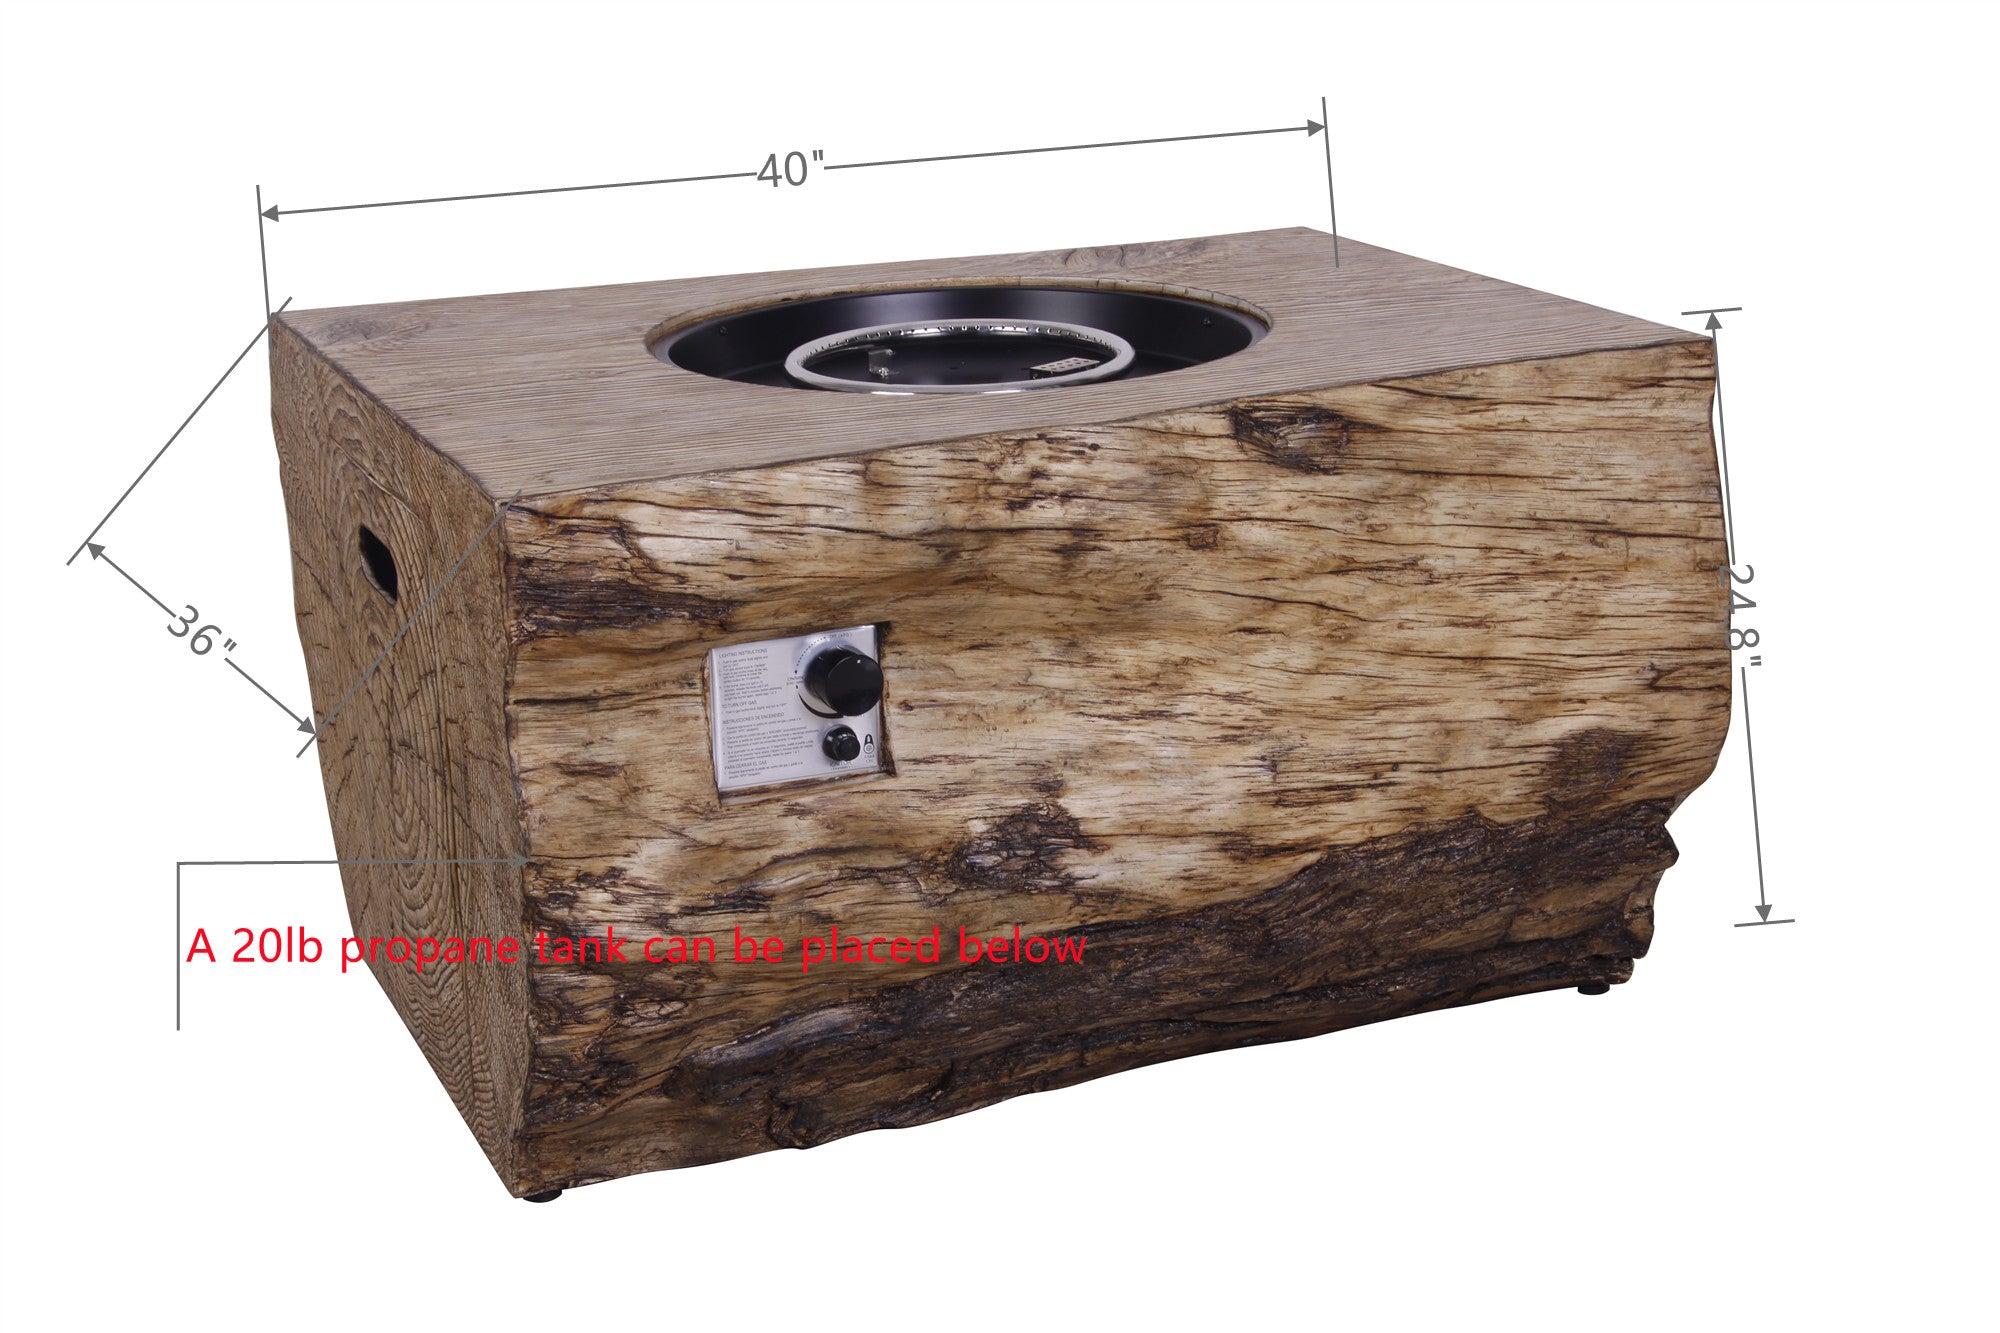 Simulated Stump Gas Fire Table with Rain Cover